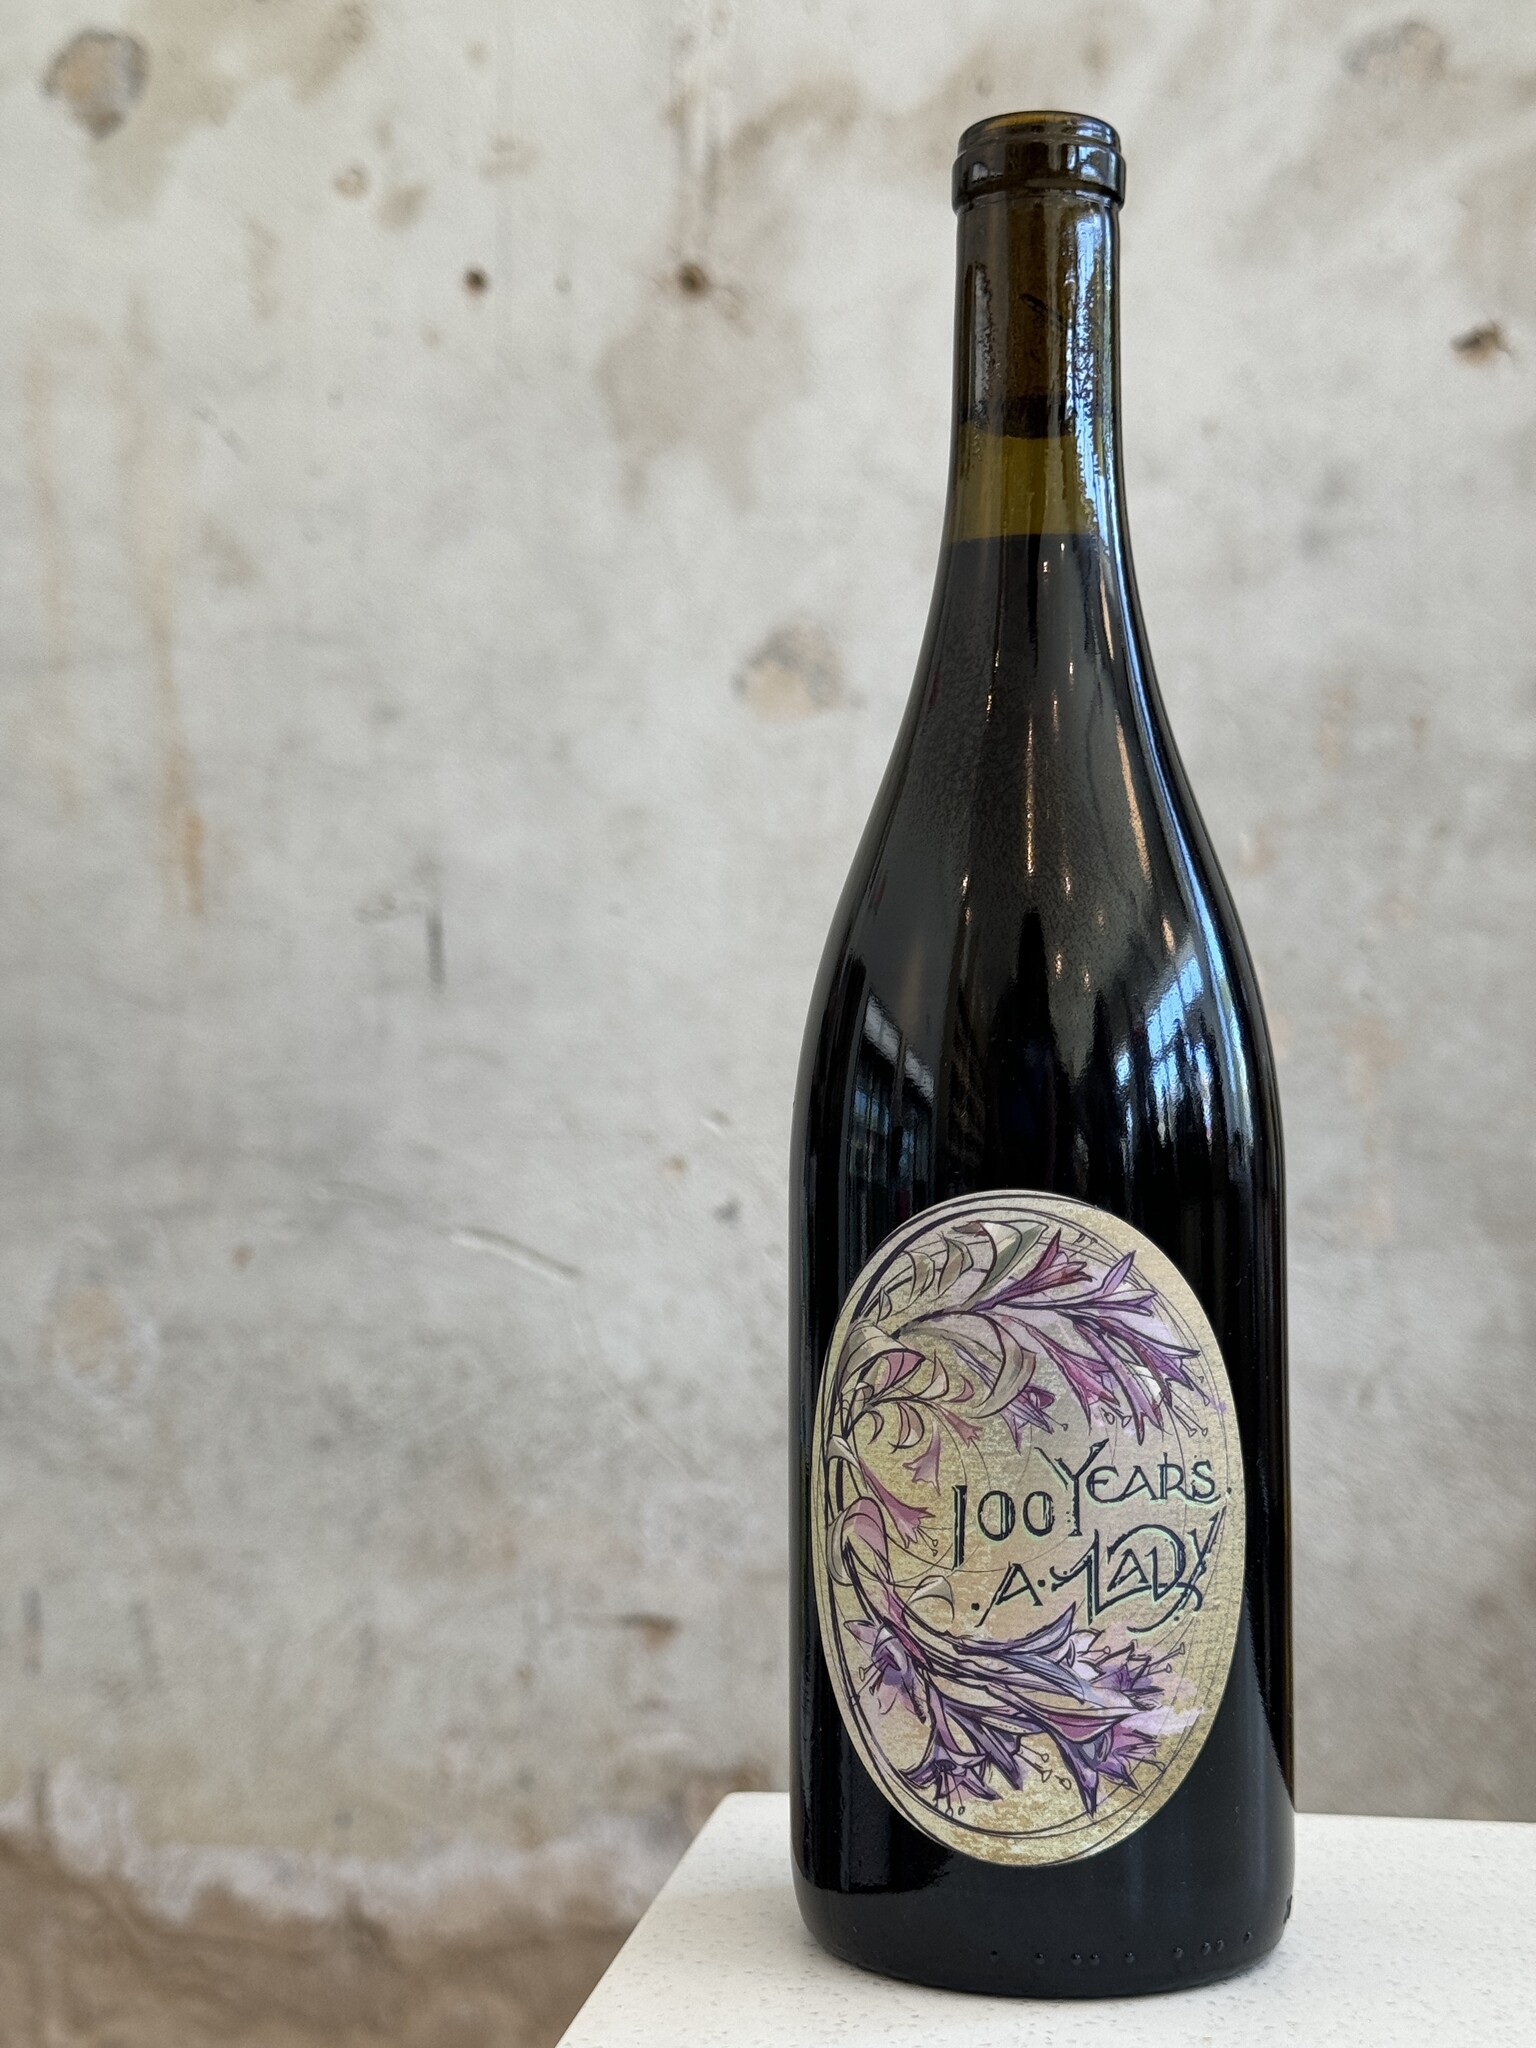 Day Wines '100 Years a Lady' Pinot Meunier